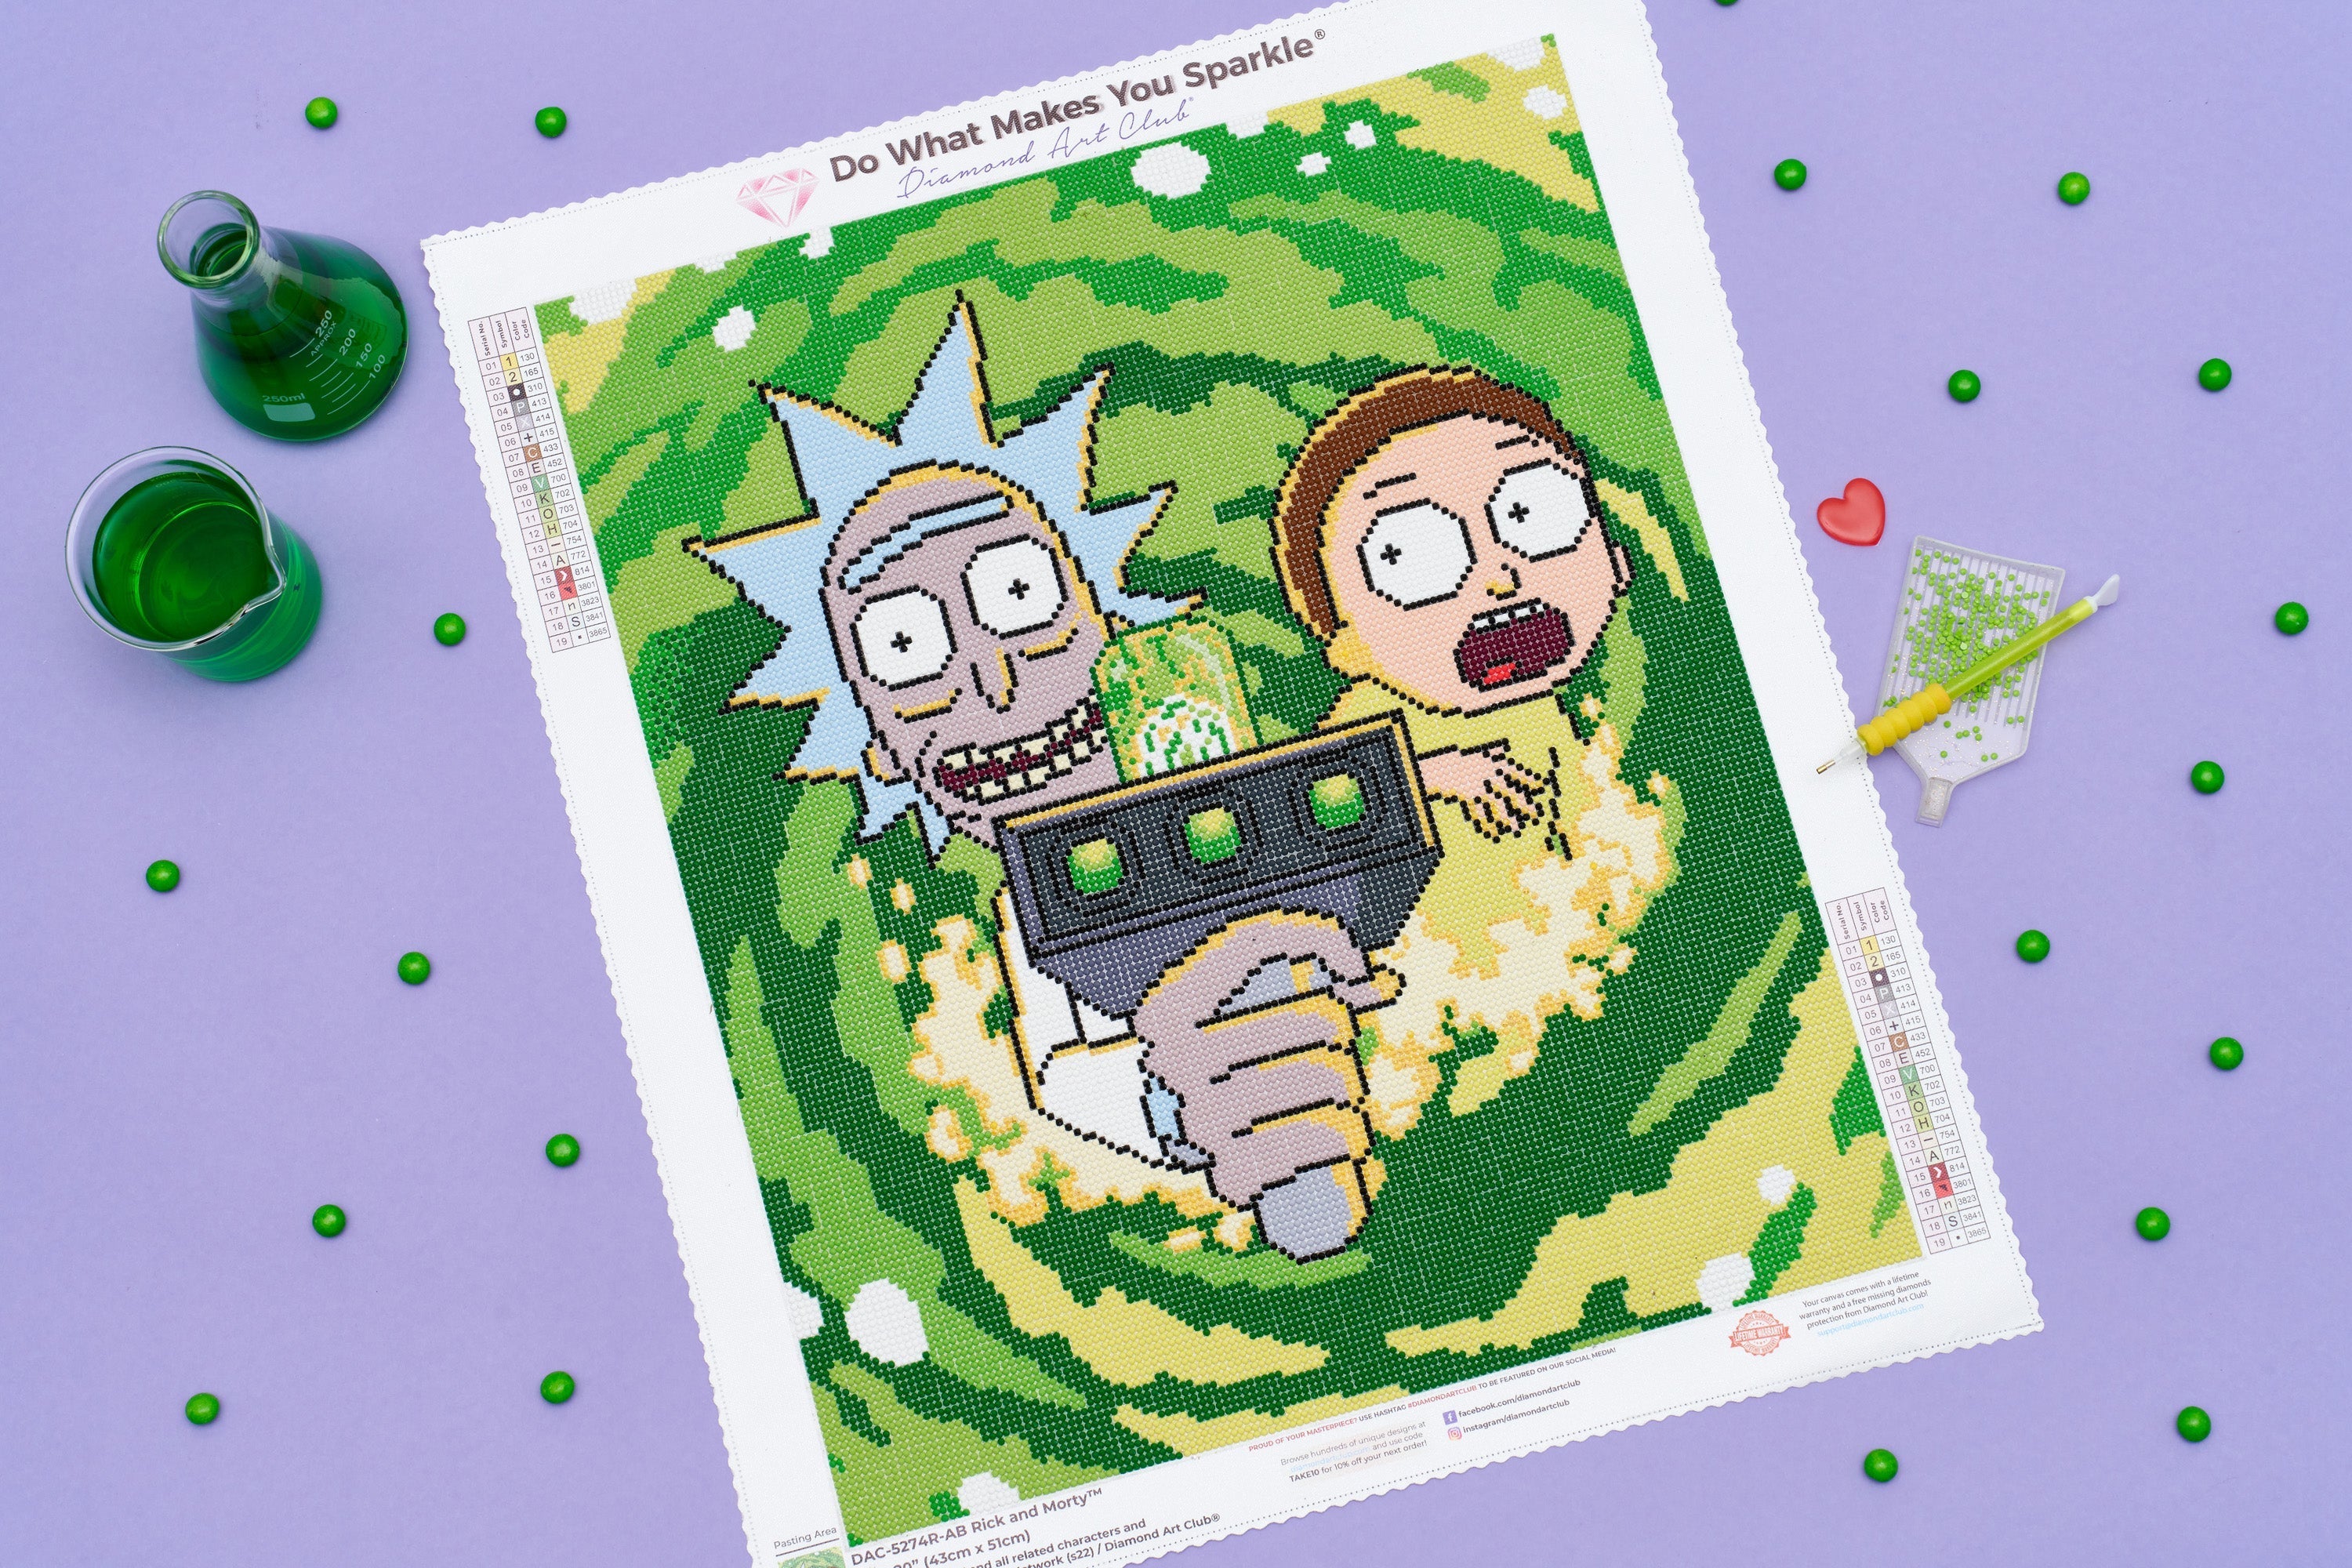 Just finished Rick and Morty🤘 : r/diamondpainting